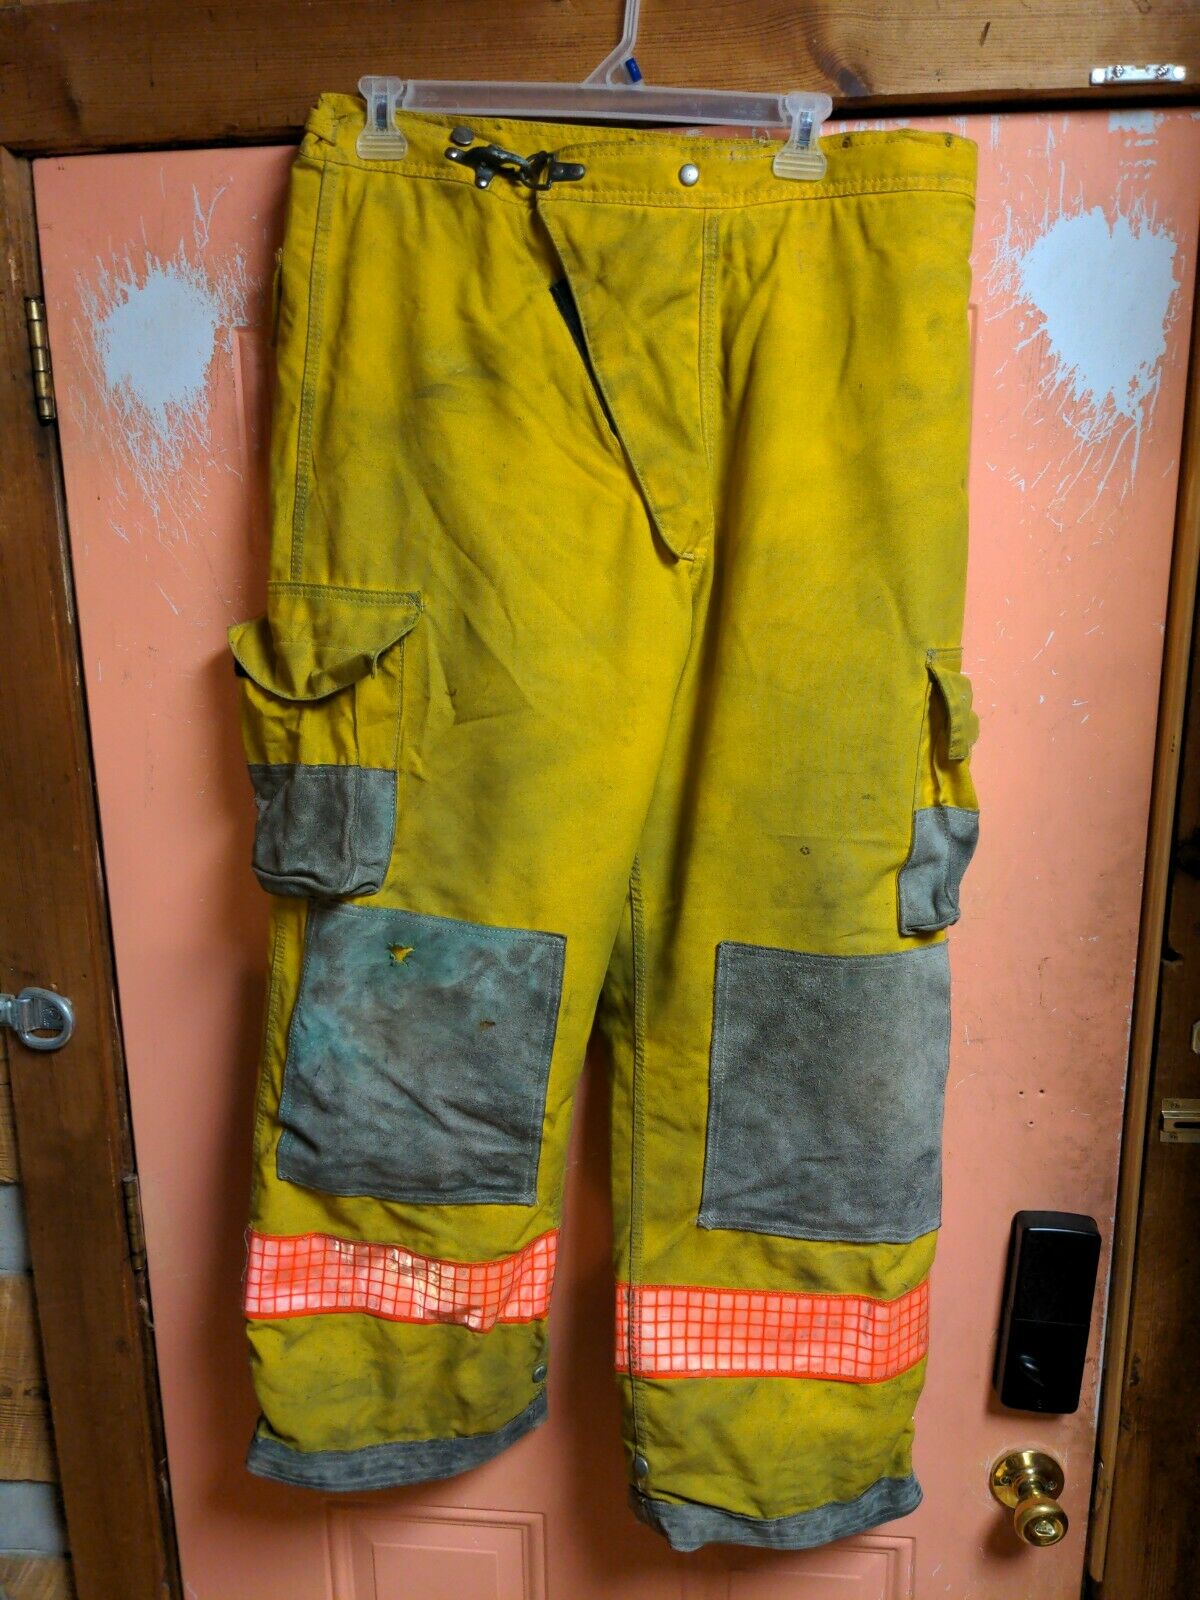 Cairns REAXTION Firefighter Pants Bunker Turnout Fire Gear RESCUE TOWING 39x29.5